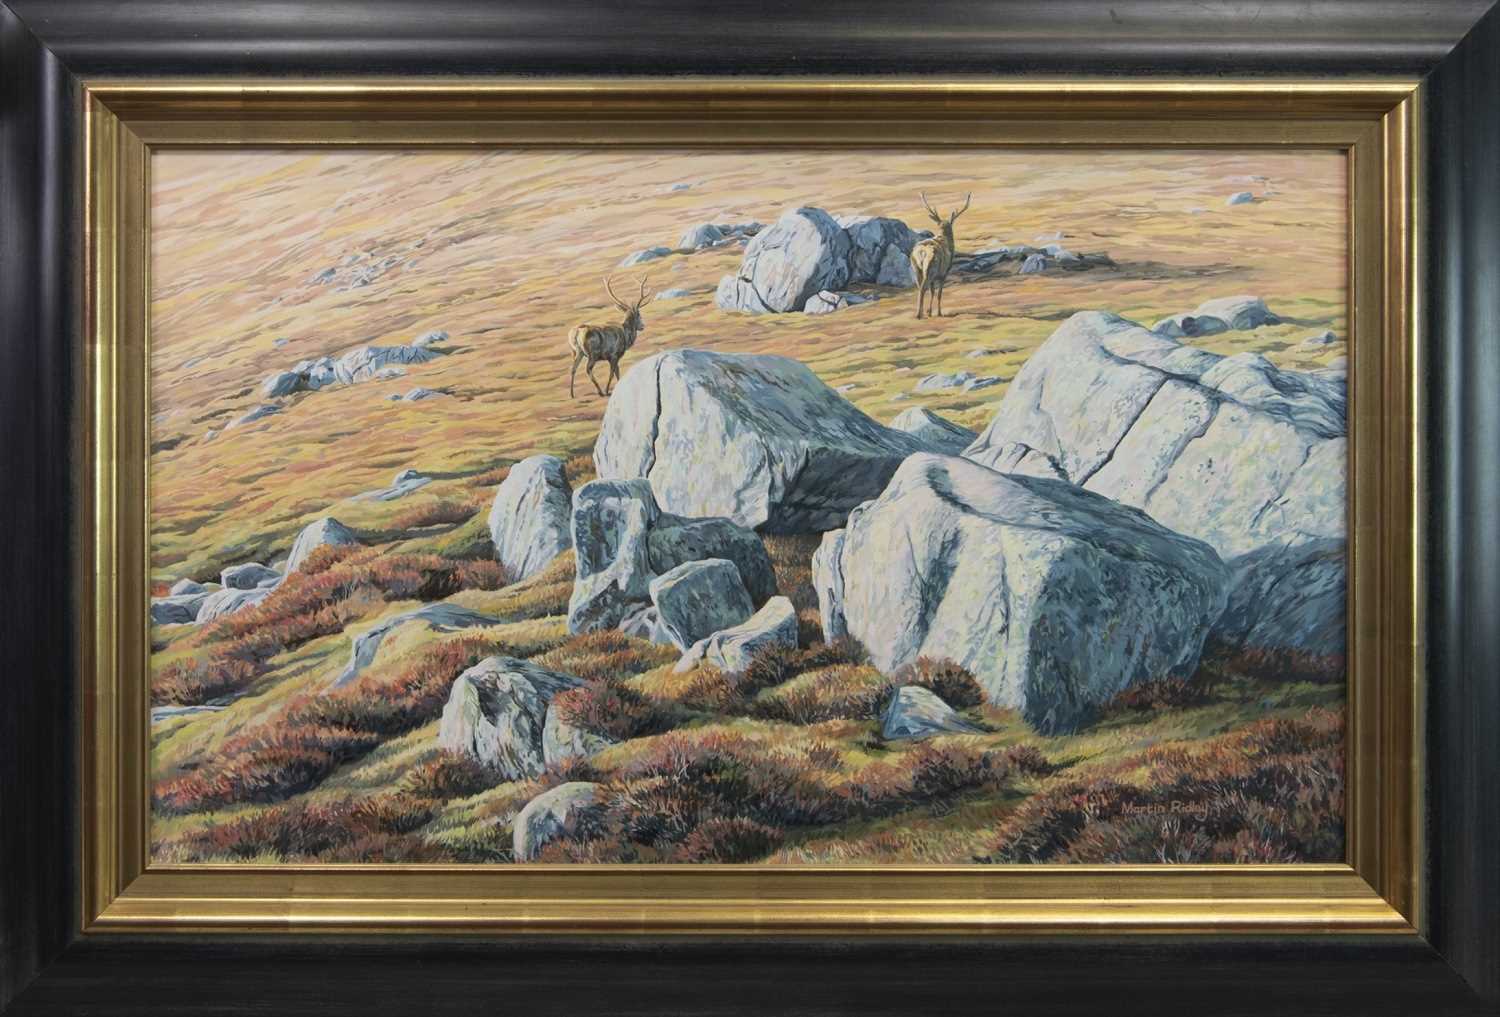 Lot 132 - "BLUE BOULDERS" RED DEER STAGS , AN OIL BY MARTIN RIDLEY